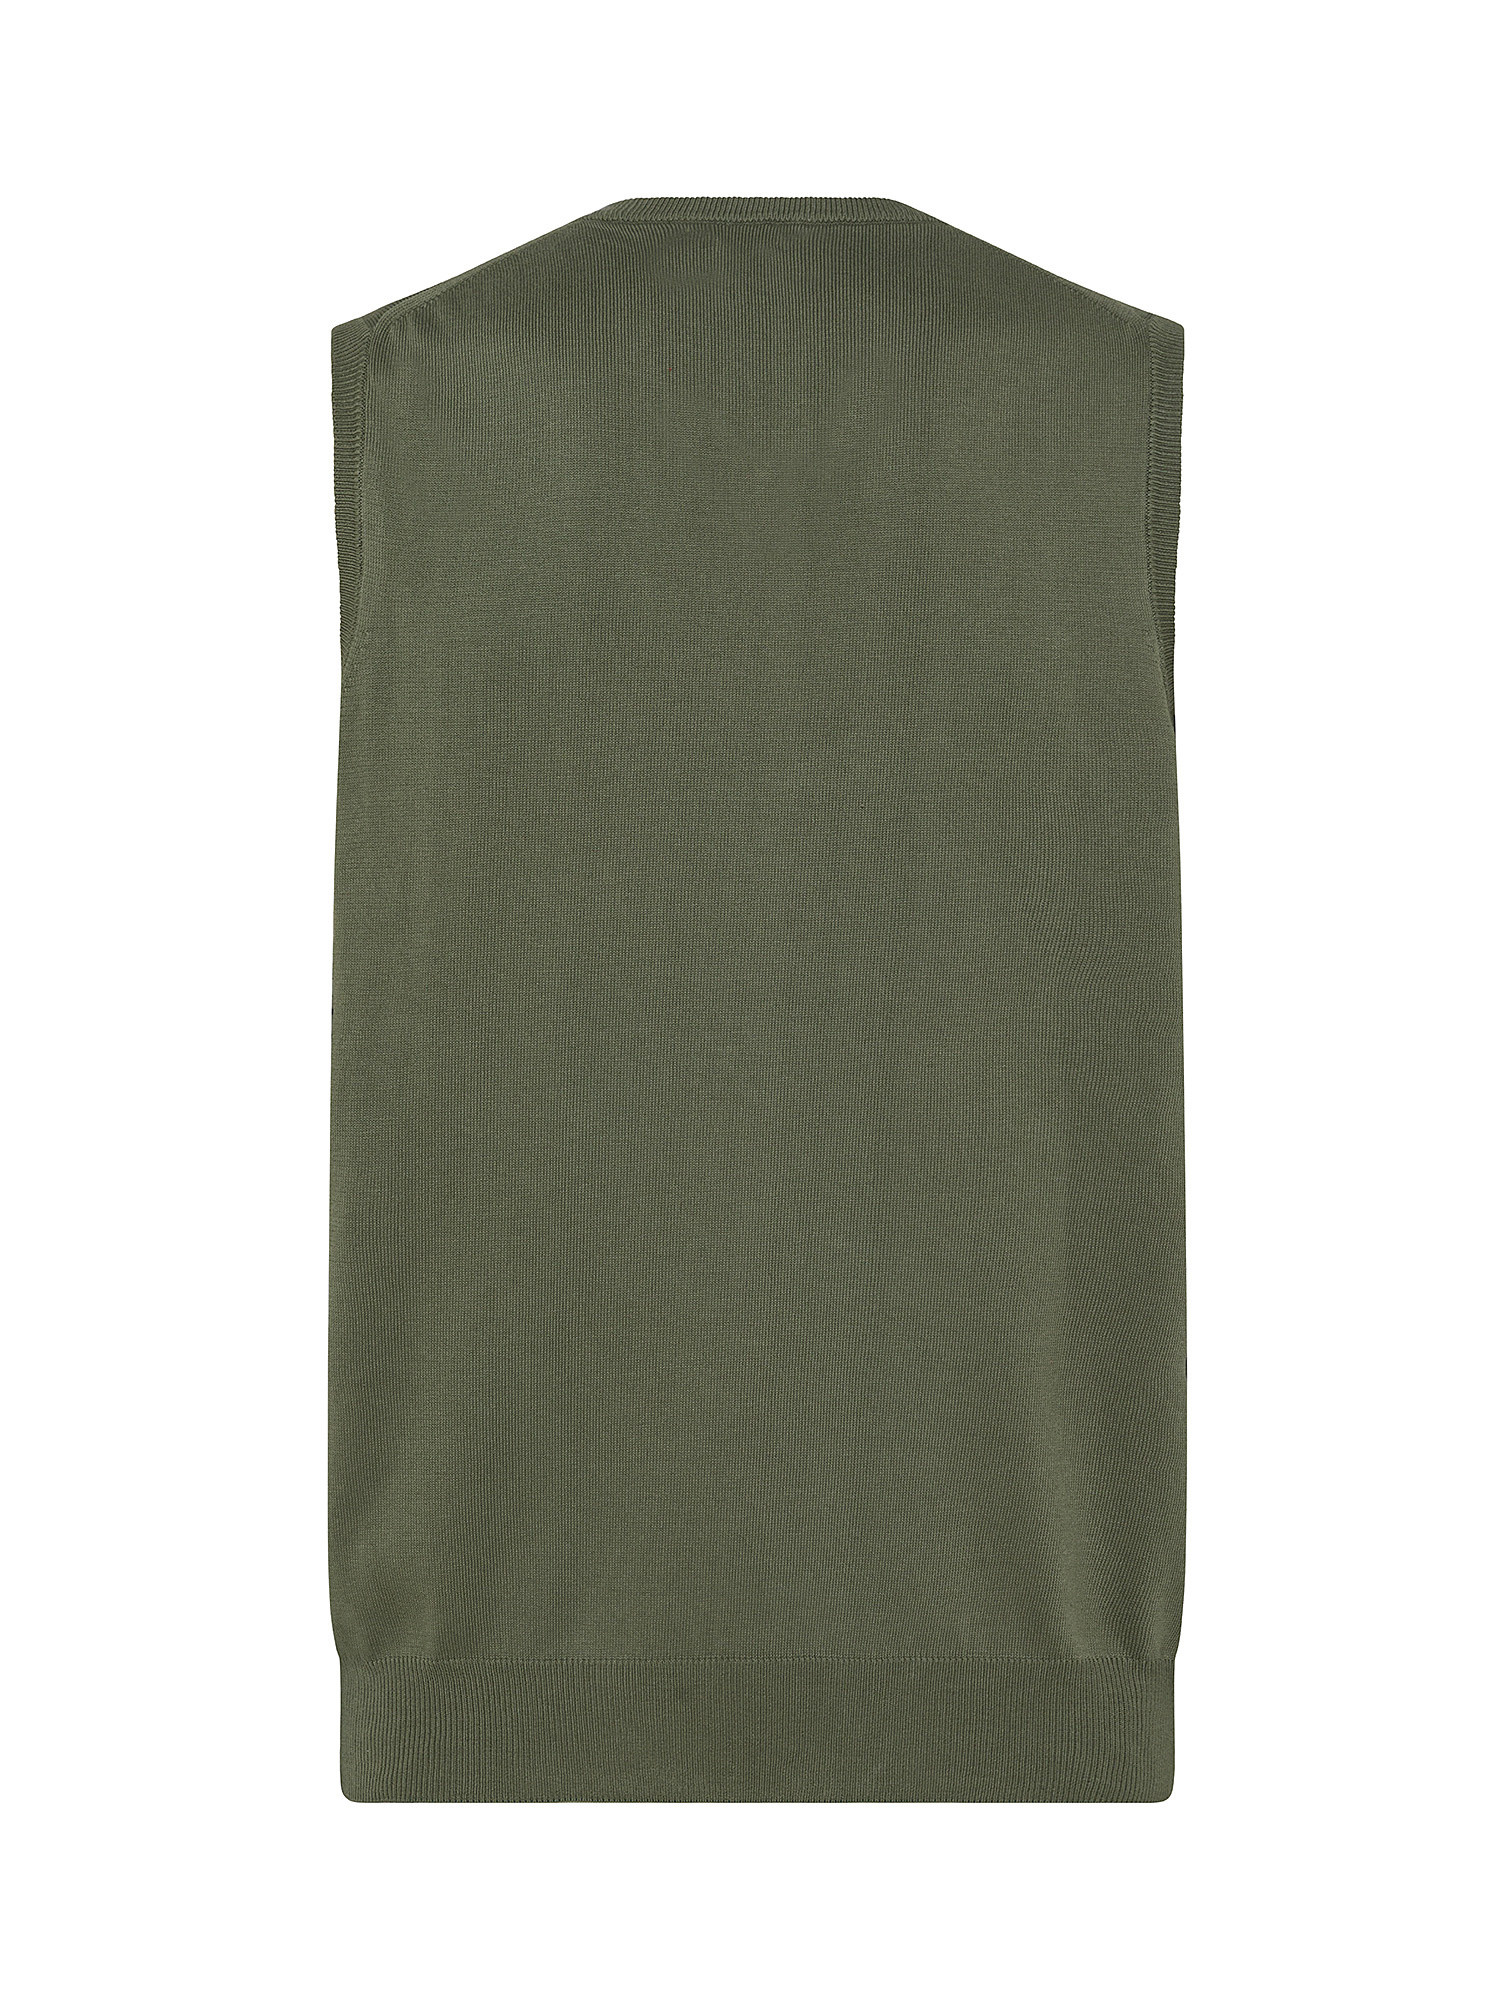 Luca D'Altieri - Extrafine cotton waistcoat, Olive Green, large image number 1